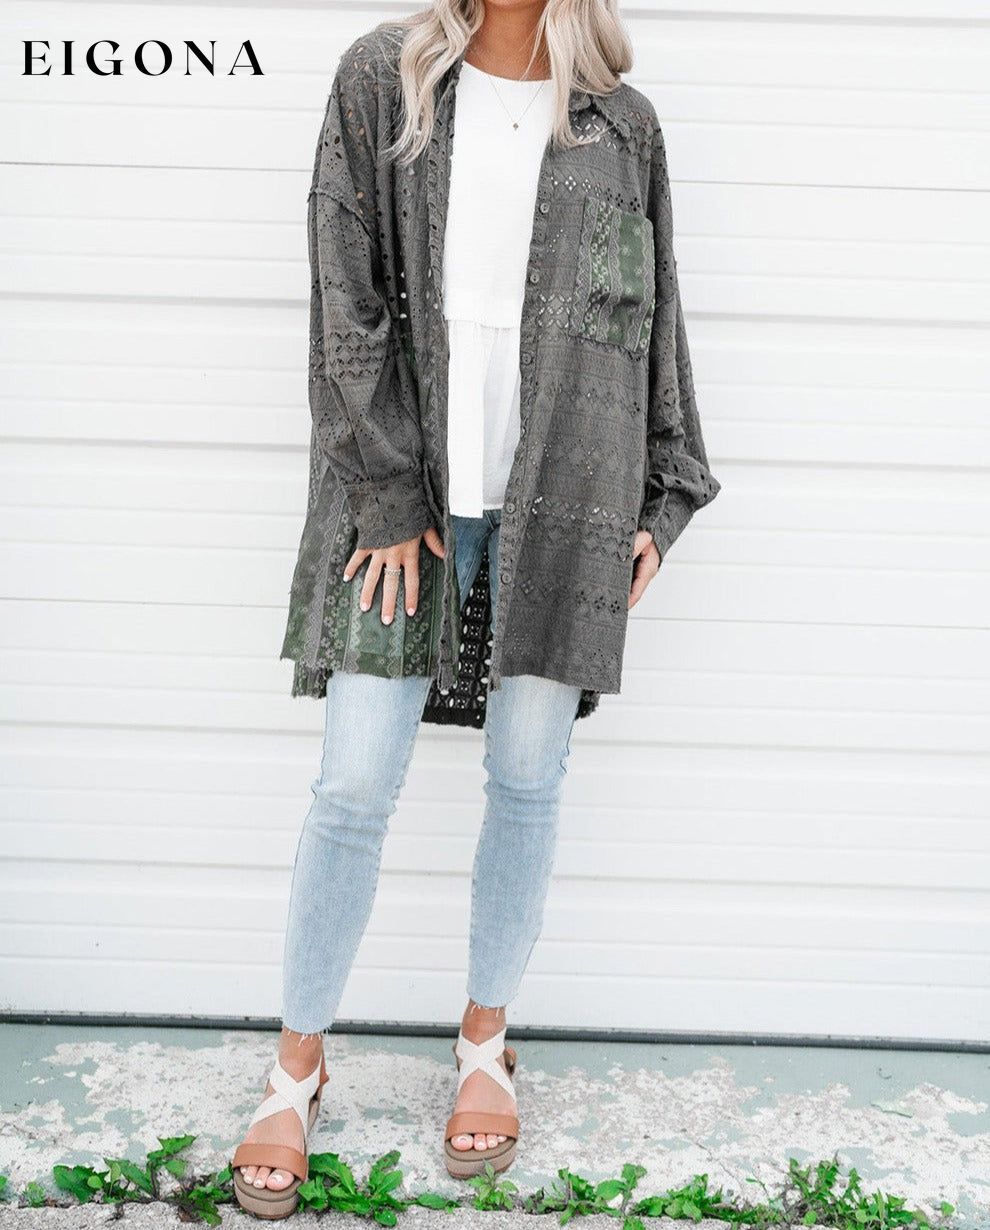 Duffel Green Eyelet Pattern Patchwork Oversized Button Up Shacket All In Stock clothes Craft Embroidery long sleeve shirt long sleeve shirts long sleeve top long sleeve tops Outerwear Print Solid Color Season Fall & Autumn shirt shirts Style Western top tops